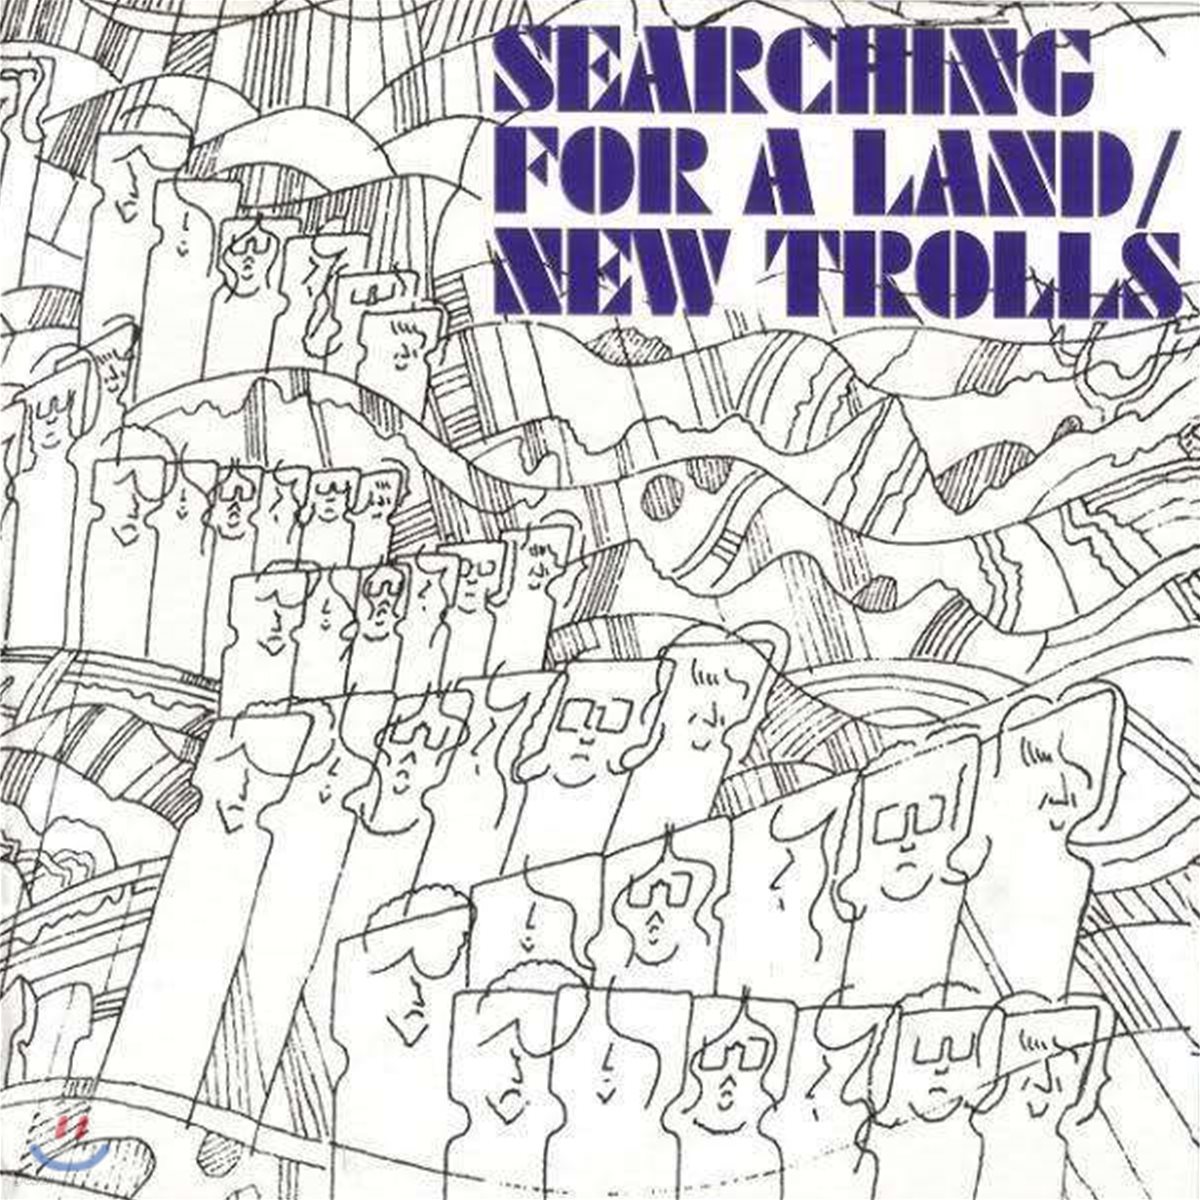 New Trolls - Searching for a Land [2 LP]